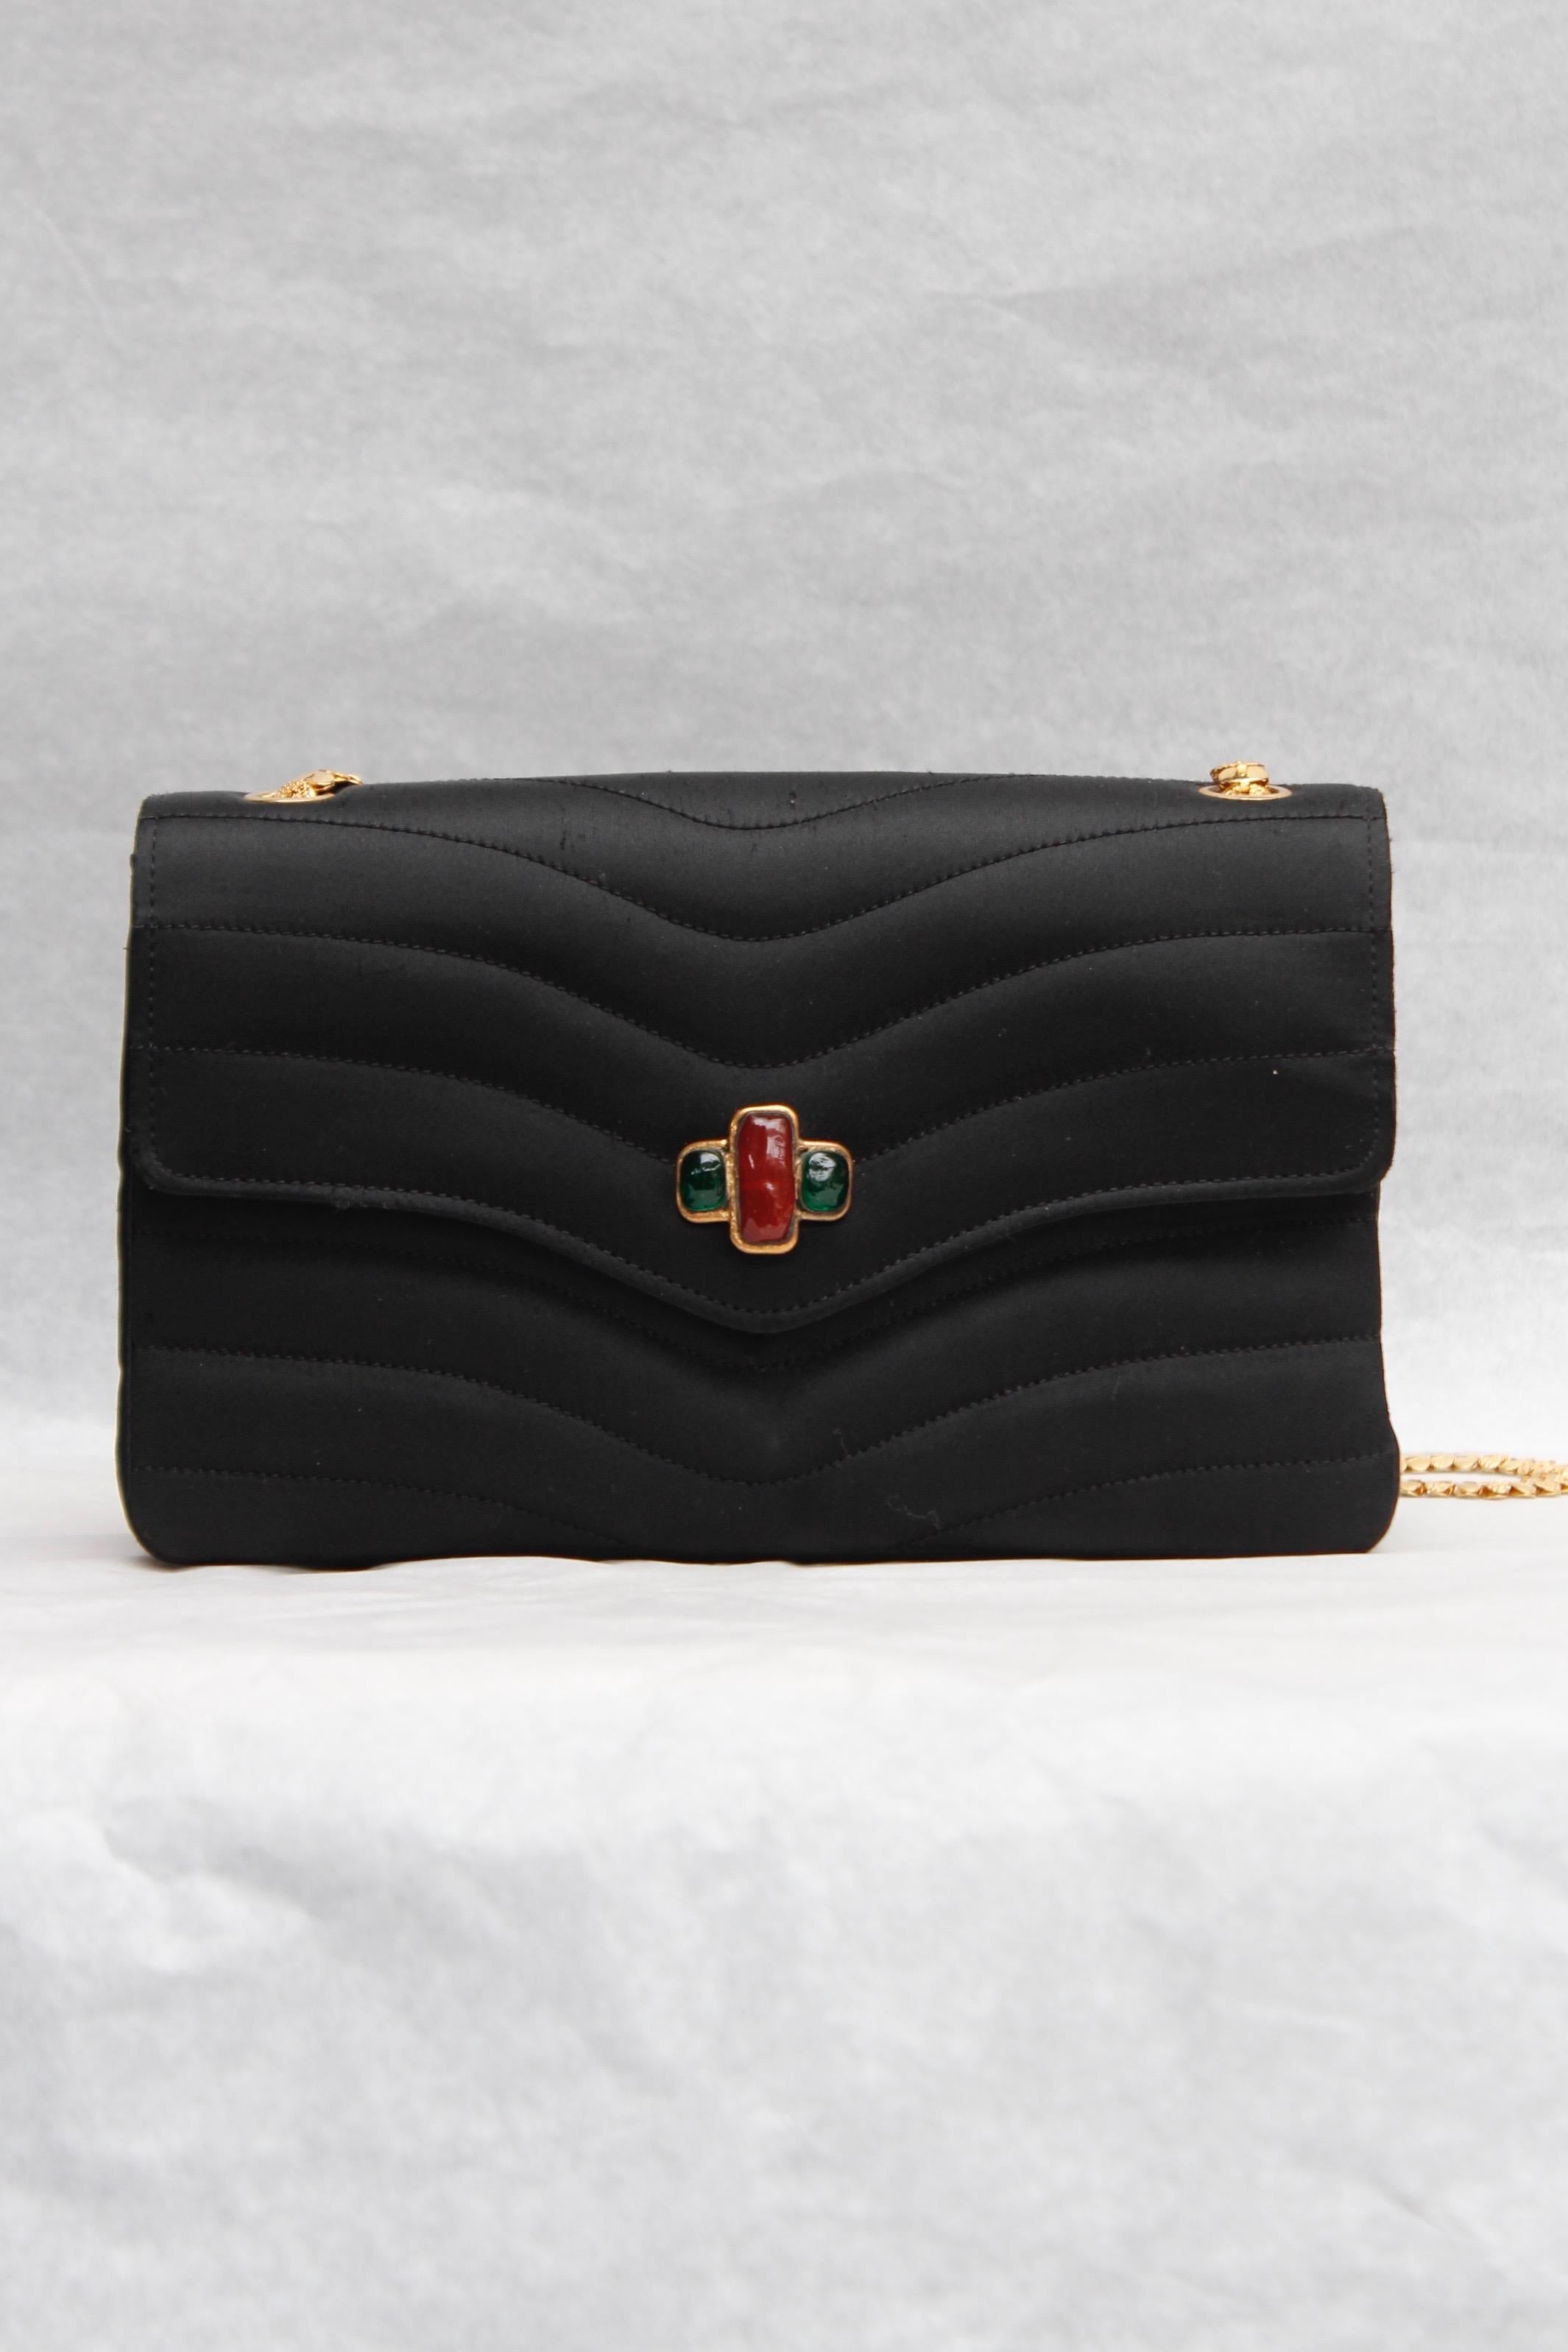 CHANEL (Made in France) Elegant evening bag in black satin over stitched with waves pattern. The flap is decorated with a a gilded metal and ruby and emerald glass paste element. It can be worn over the shoulder or cross-body, thanks to a lovely